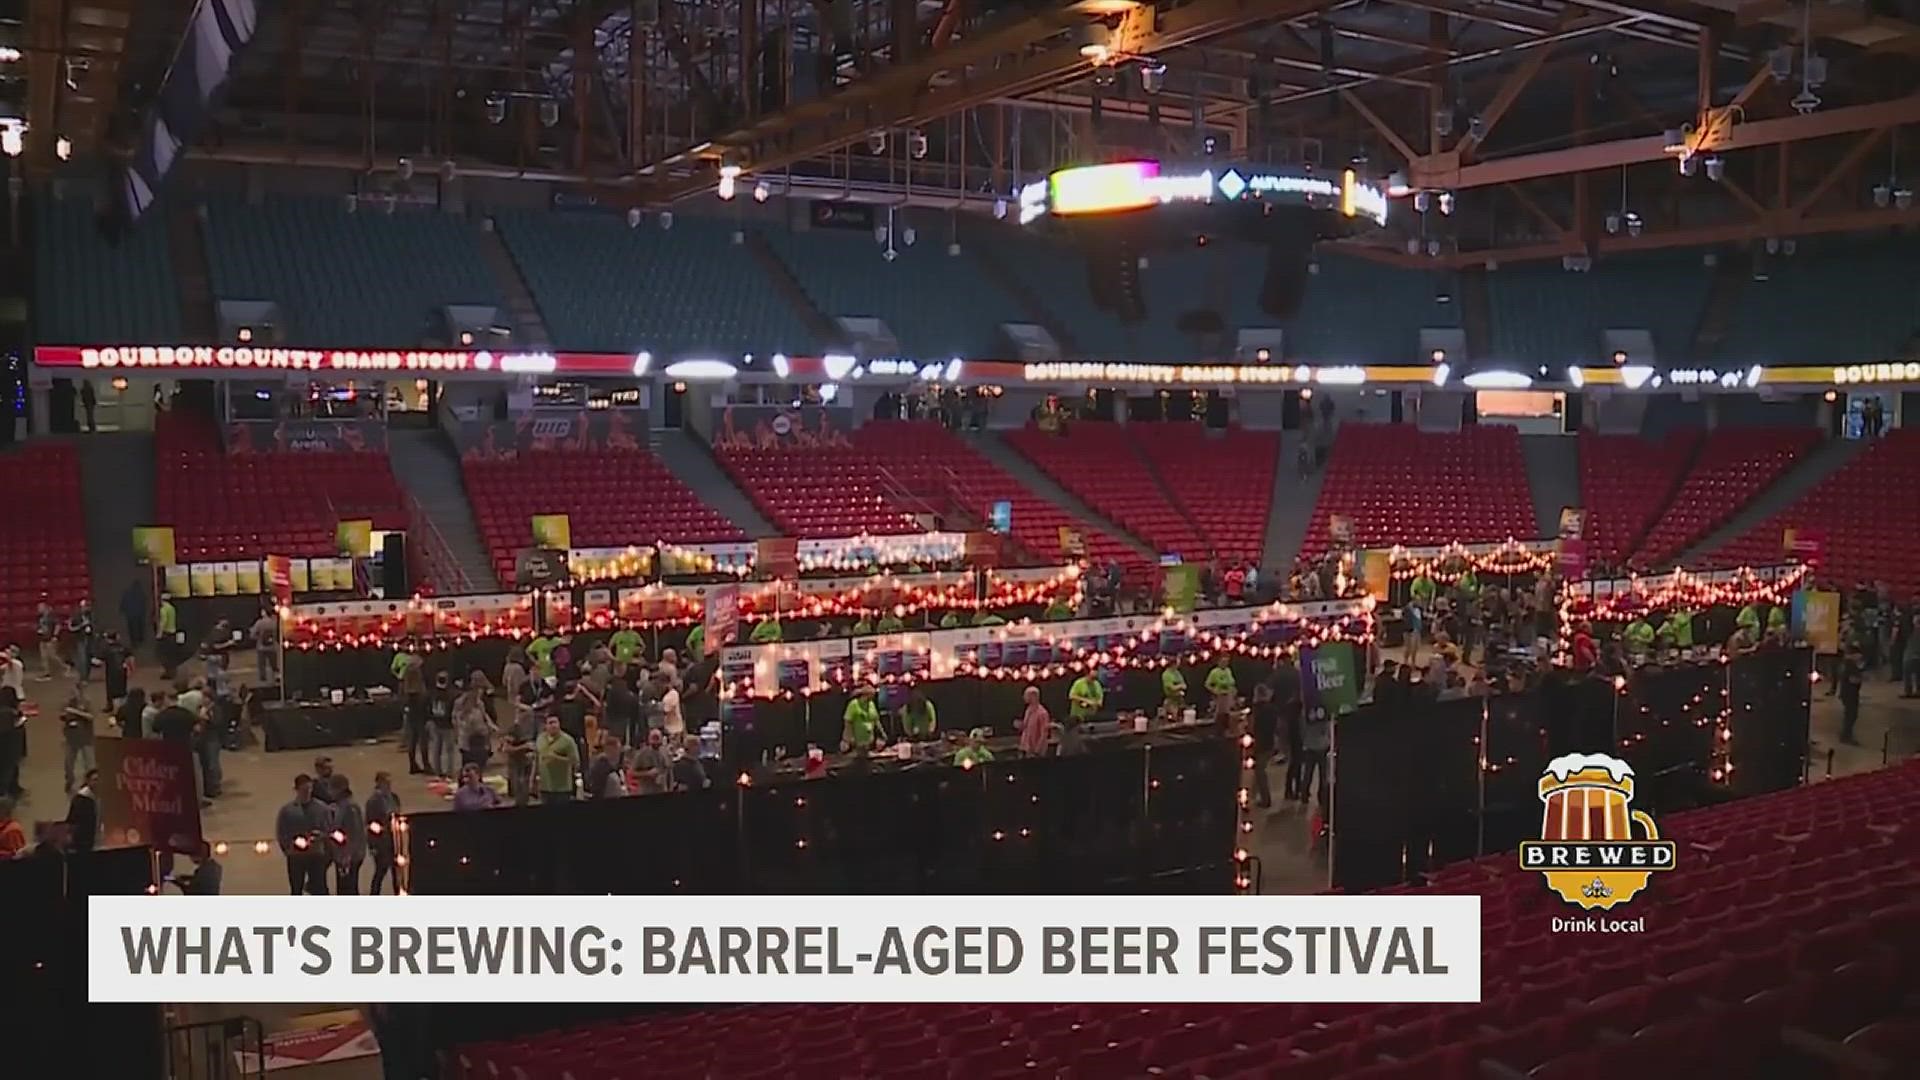 Brewed host Dave Levora dropped by the studio to give us a behind-the-scenes look at one of the Midwest's biggest brew festivals.